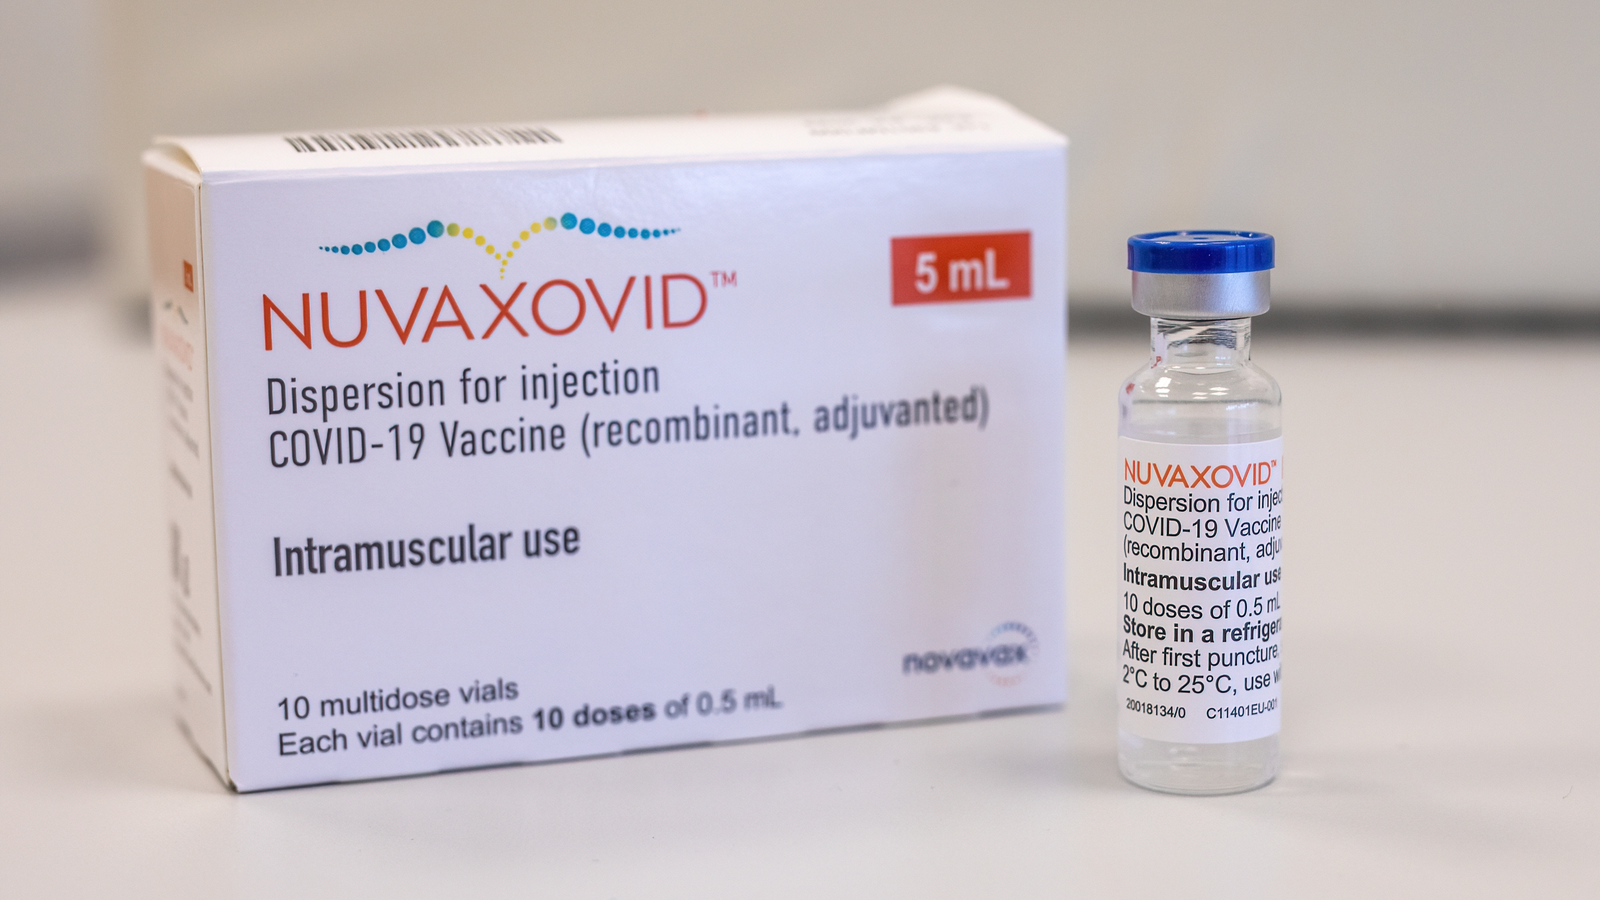 Novavax (NVAX) Covid-19 vaccine Nuvaxovid; Original vaccine vial standing right next to the box in front of white background